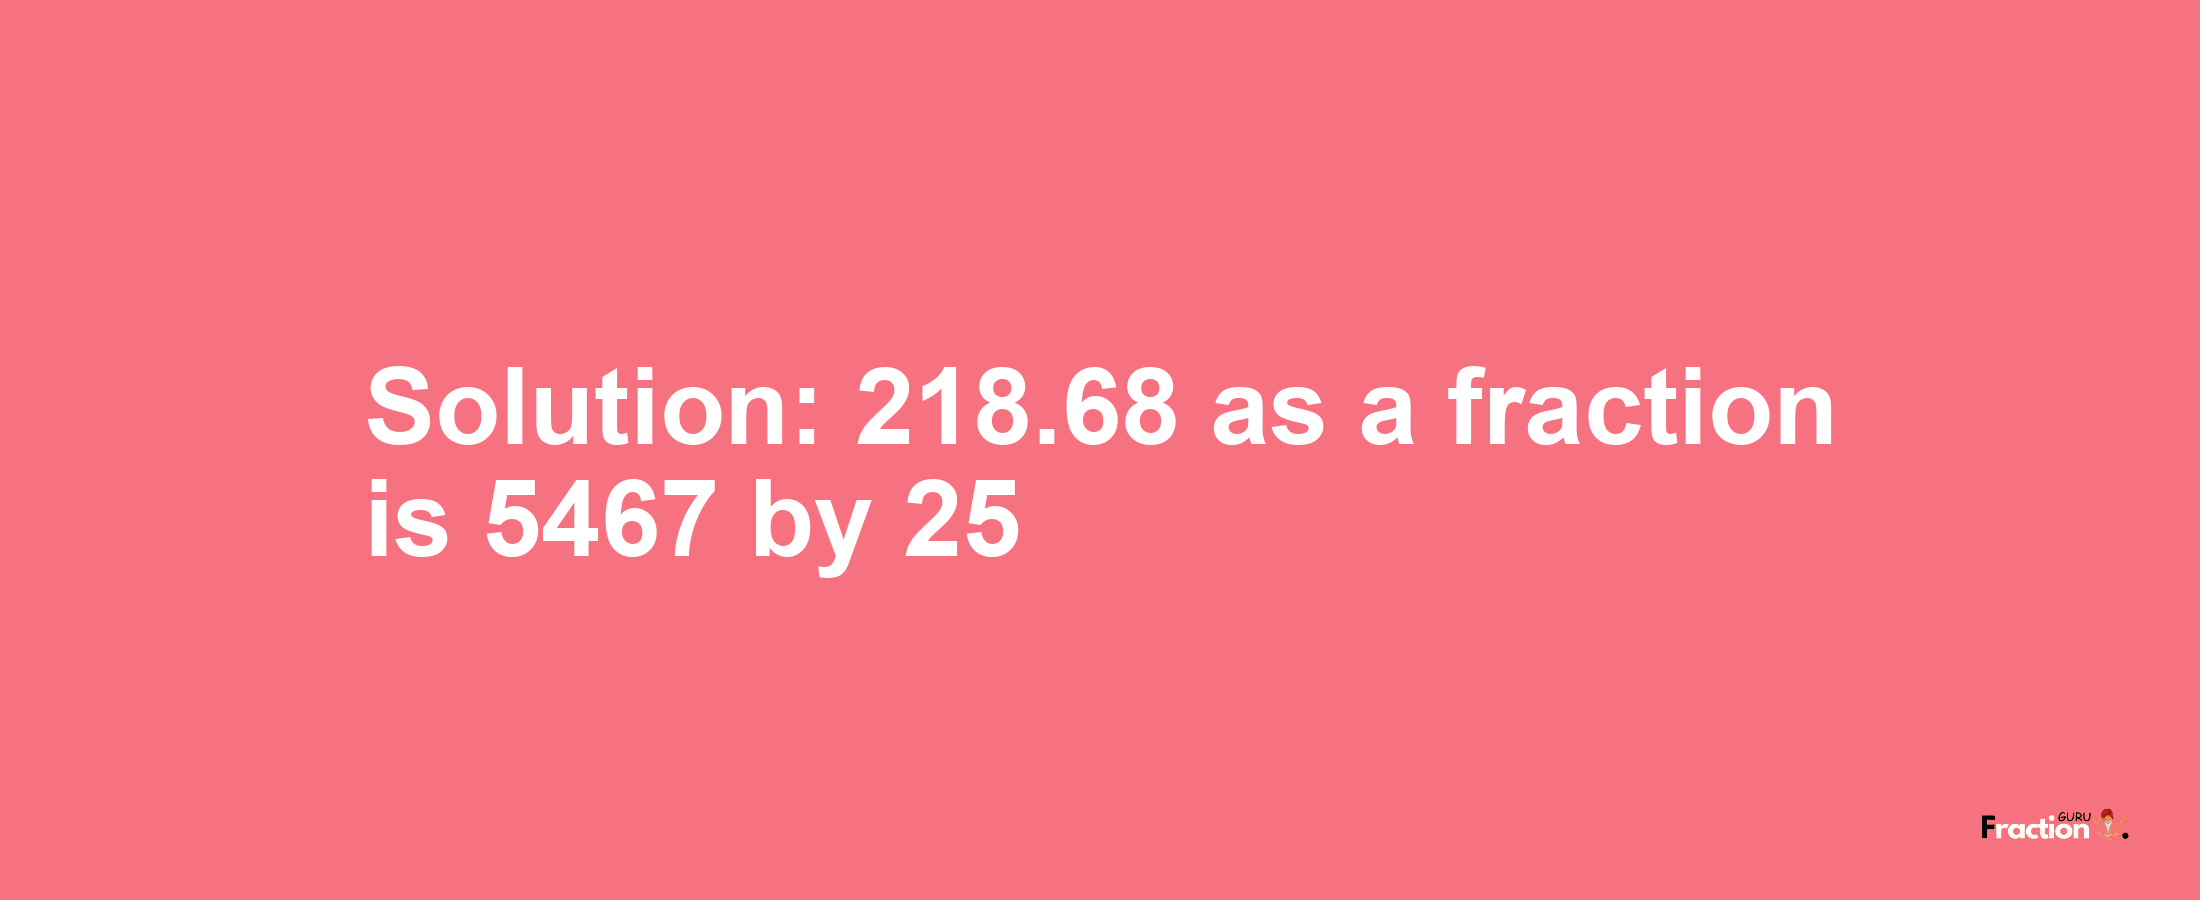 Solution:218.68 as a fraction is 5467/25